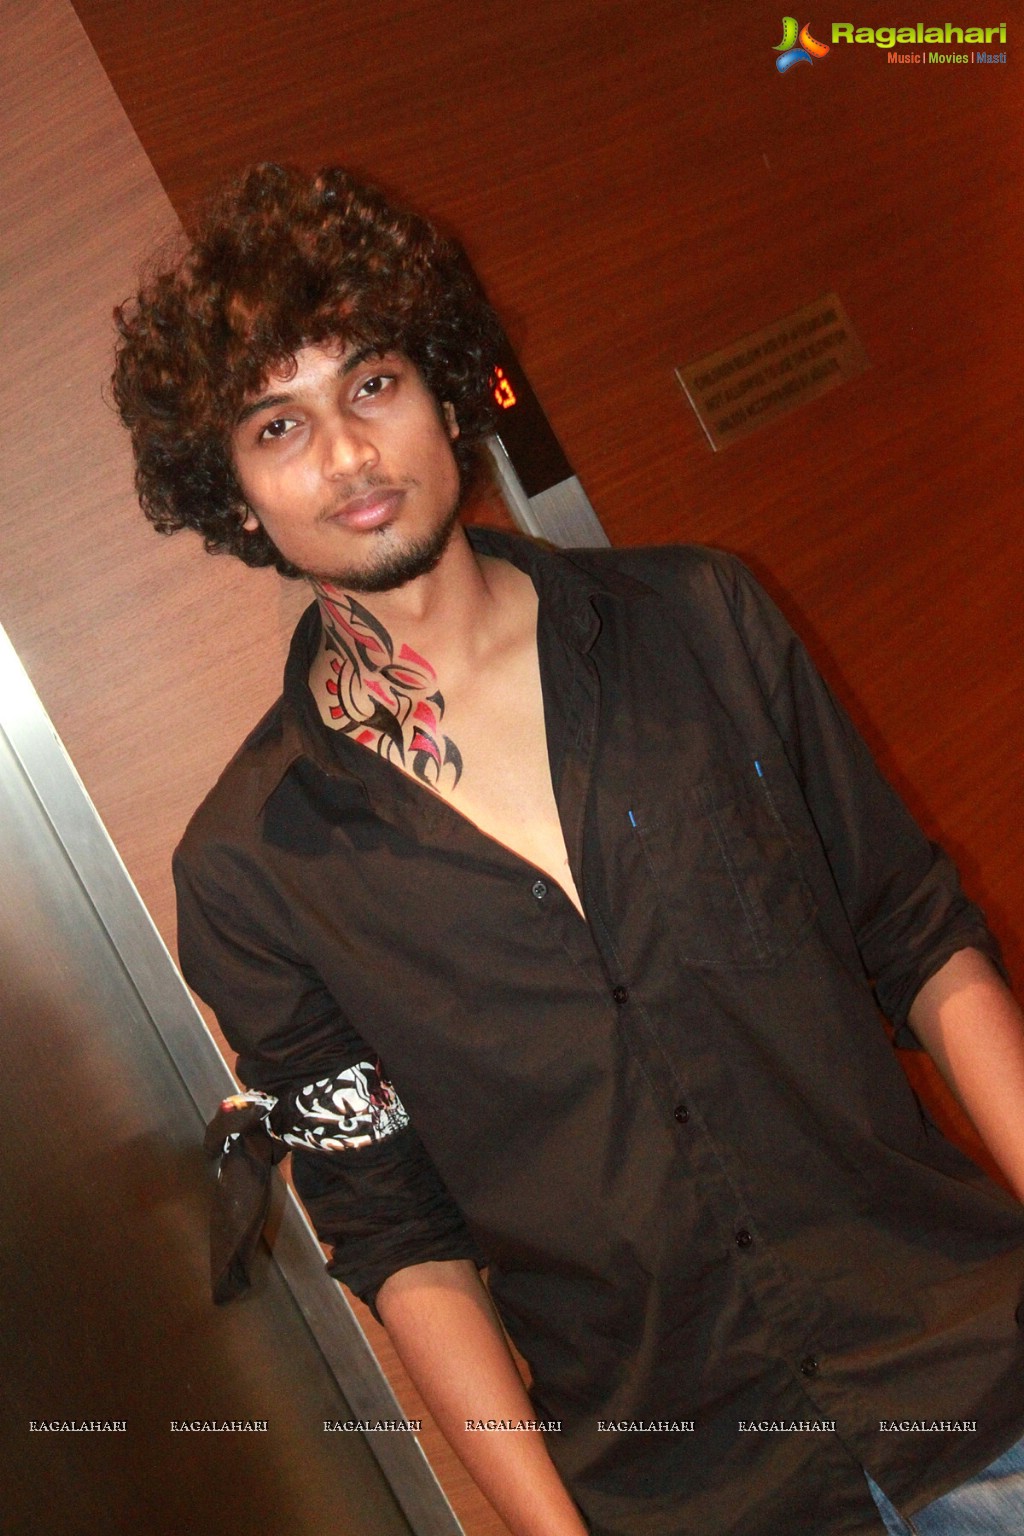 Pirates Party by Chocolate Boy at Movida, Hyderabad